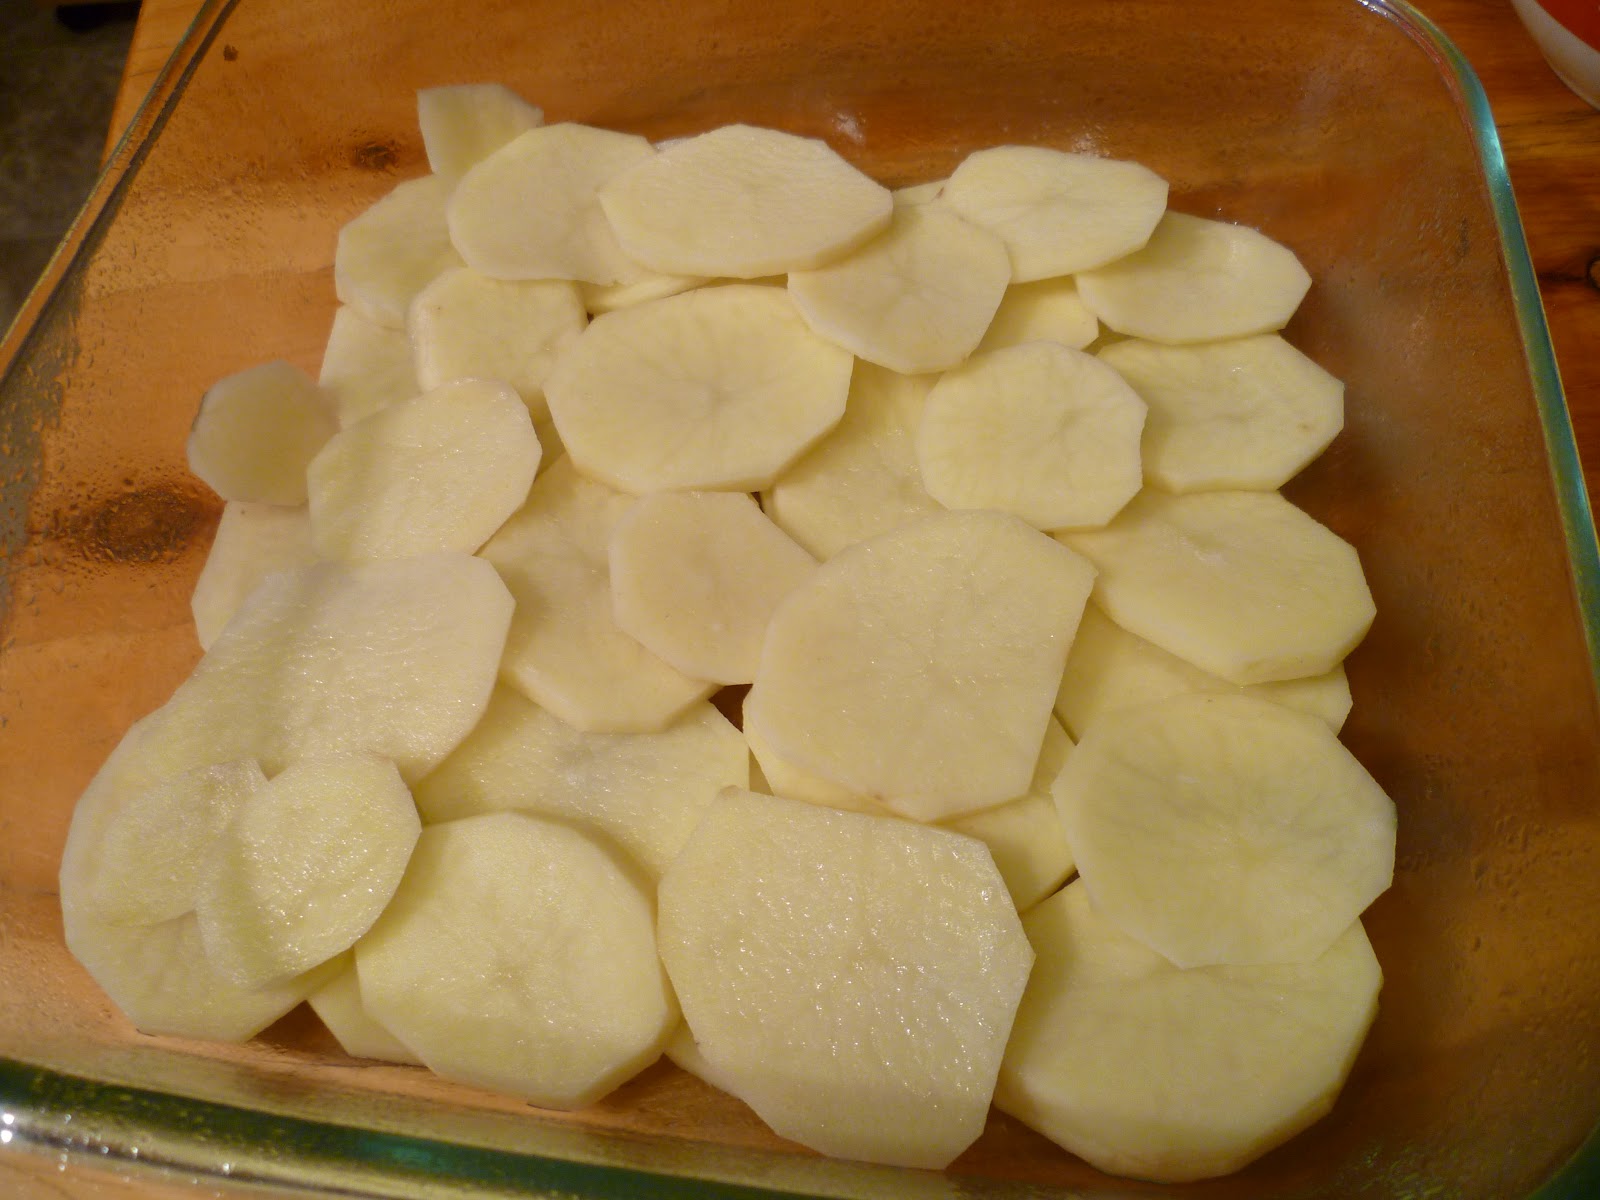 My Food Infatuation: The Greater Scalloped Potater